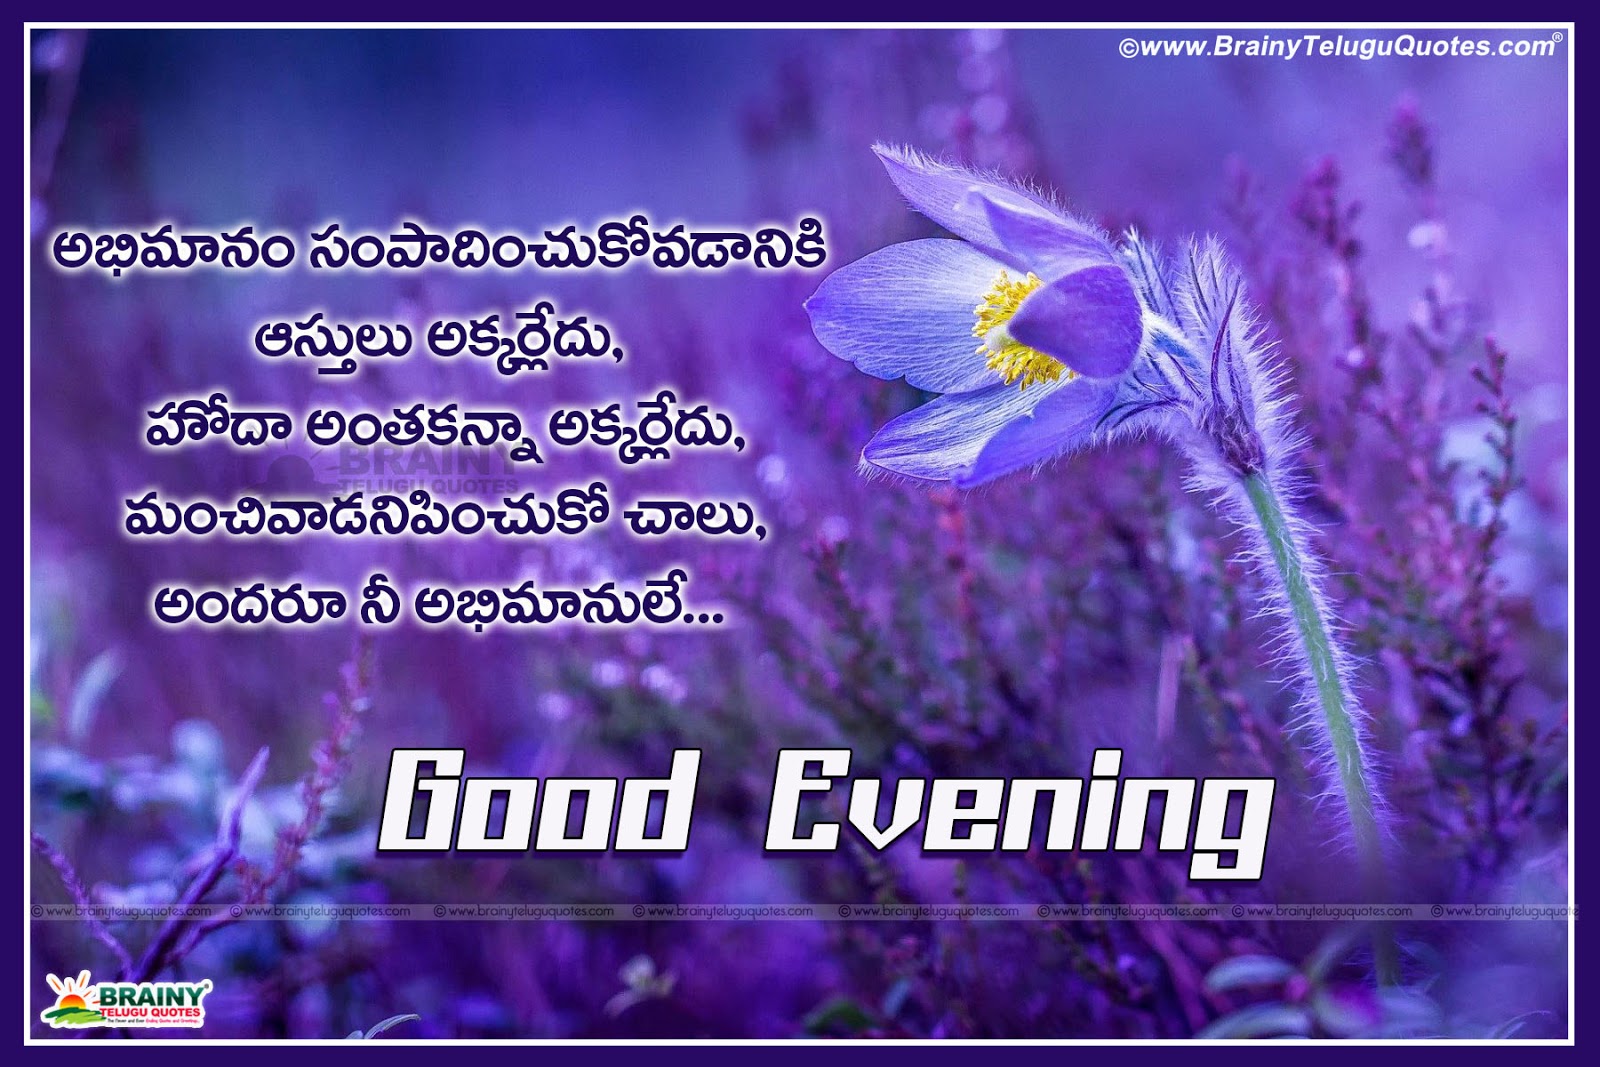 Here is good evening quotes with images for funny good evening quotes telugu